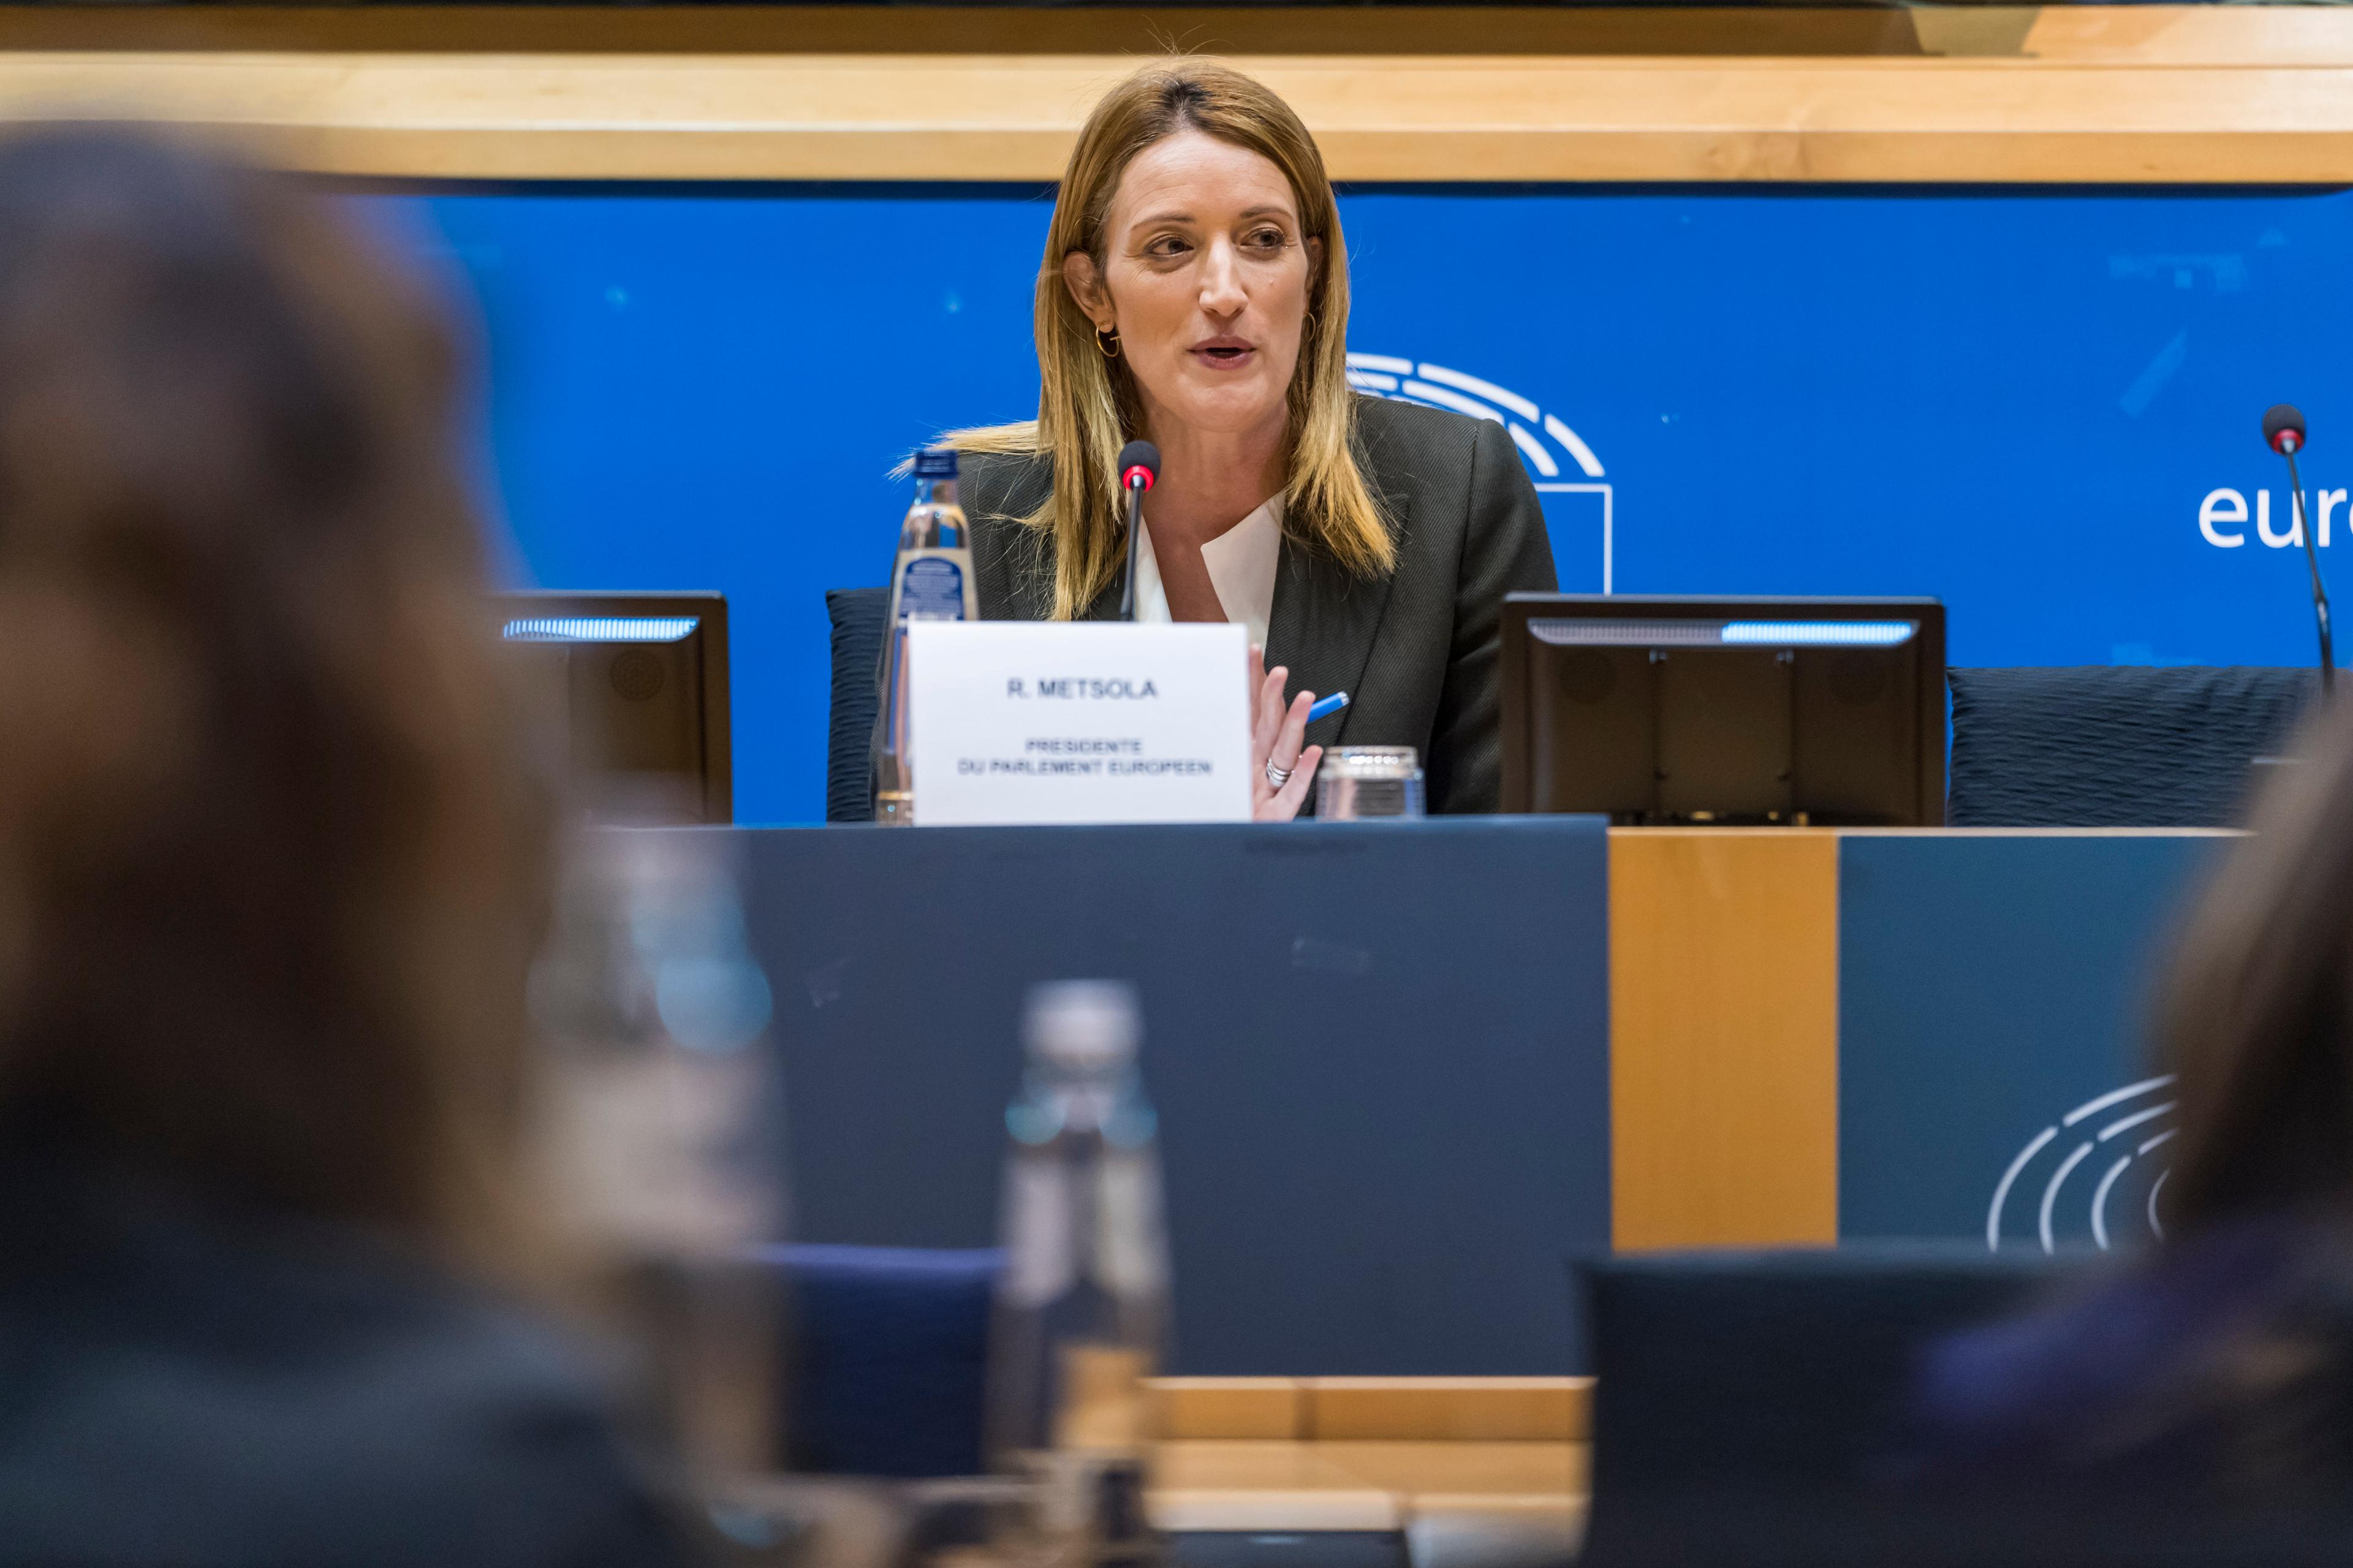 Adress by Roberta METSOLA, EP President at the Anti-SLAPP Conference